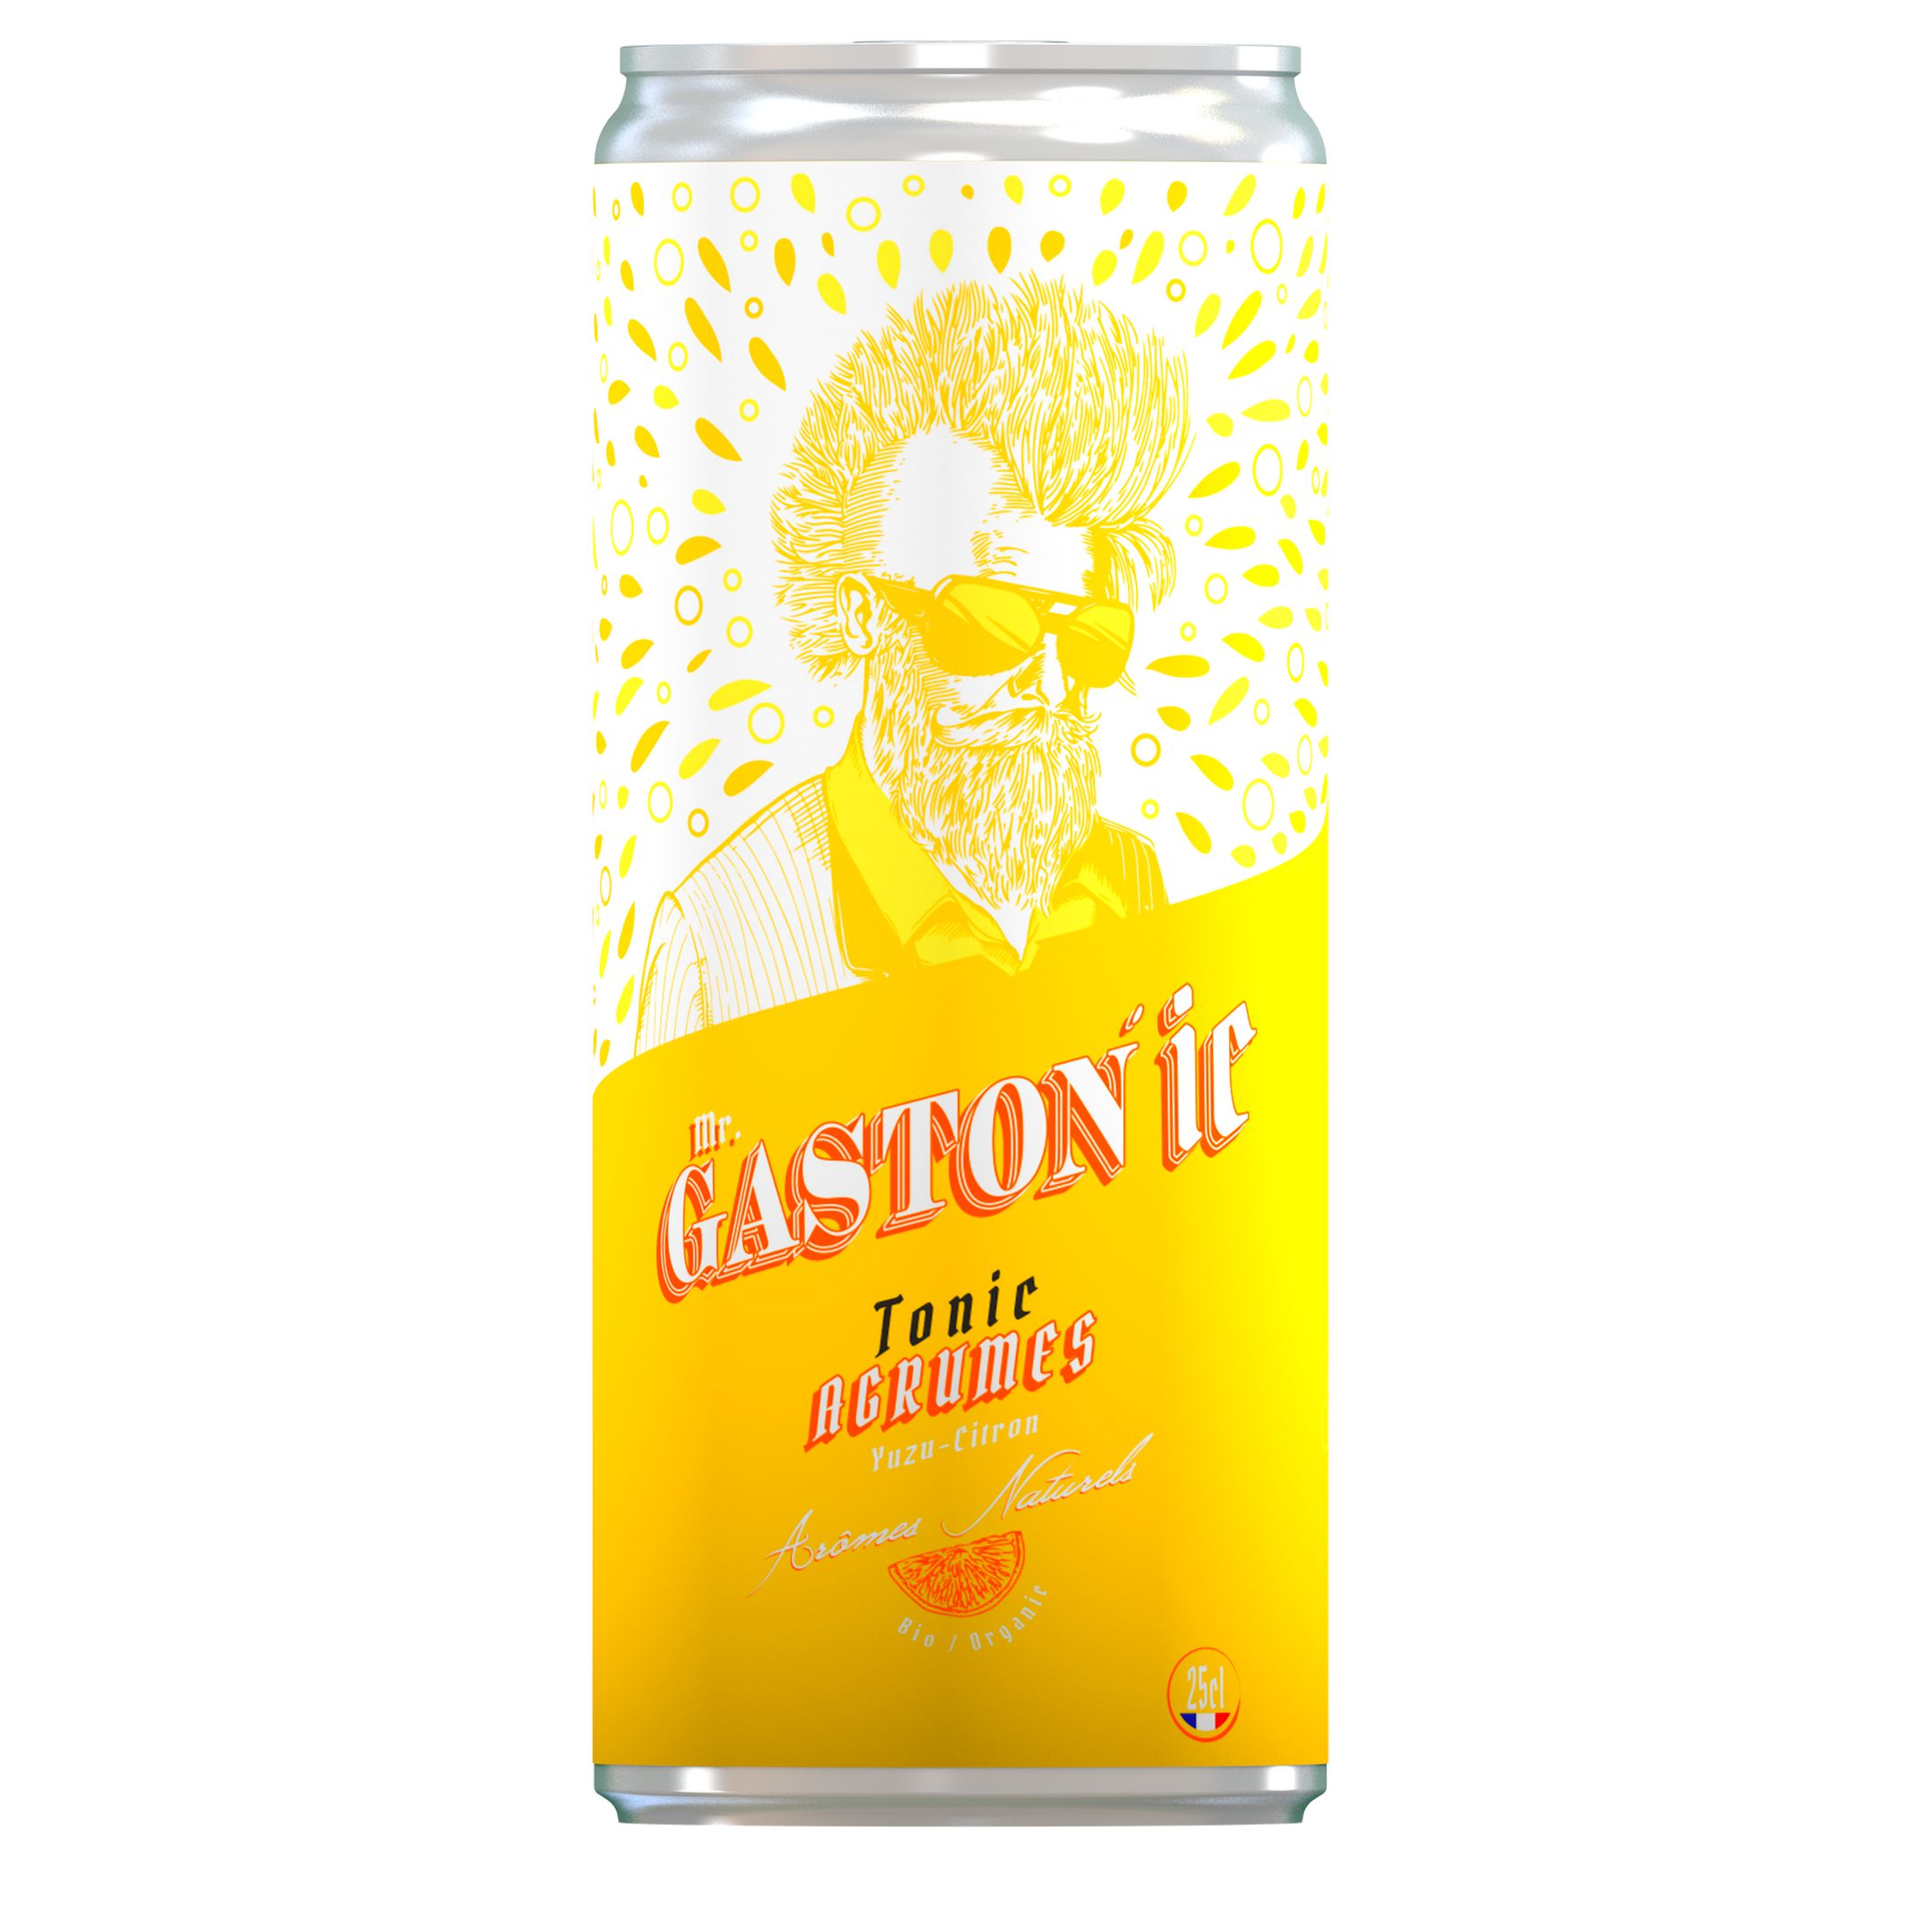 Mr Gaston'ic - Tonic Agrumes - Canette 25cl